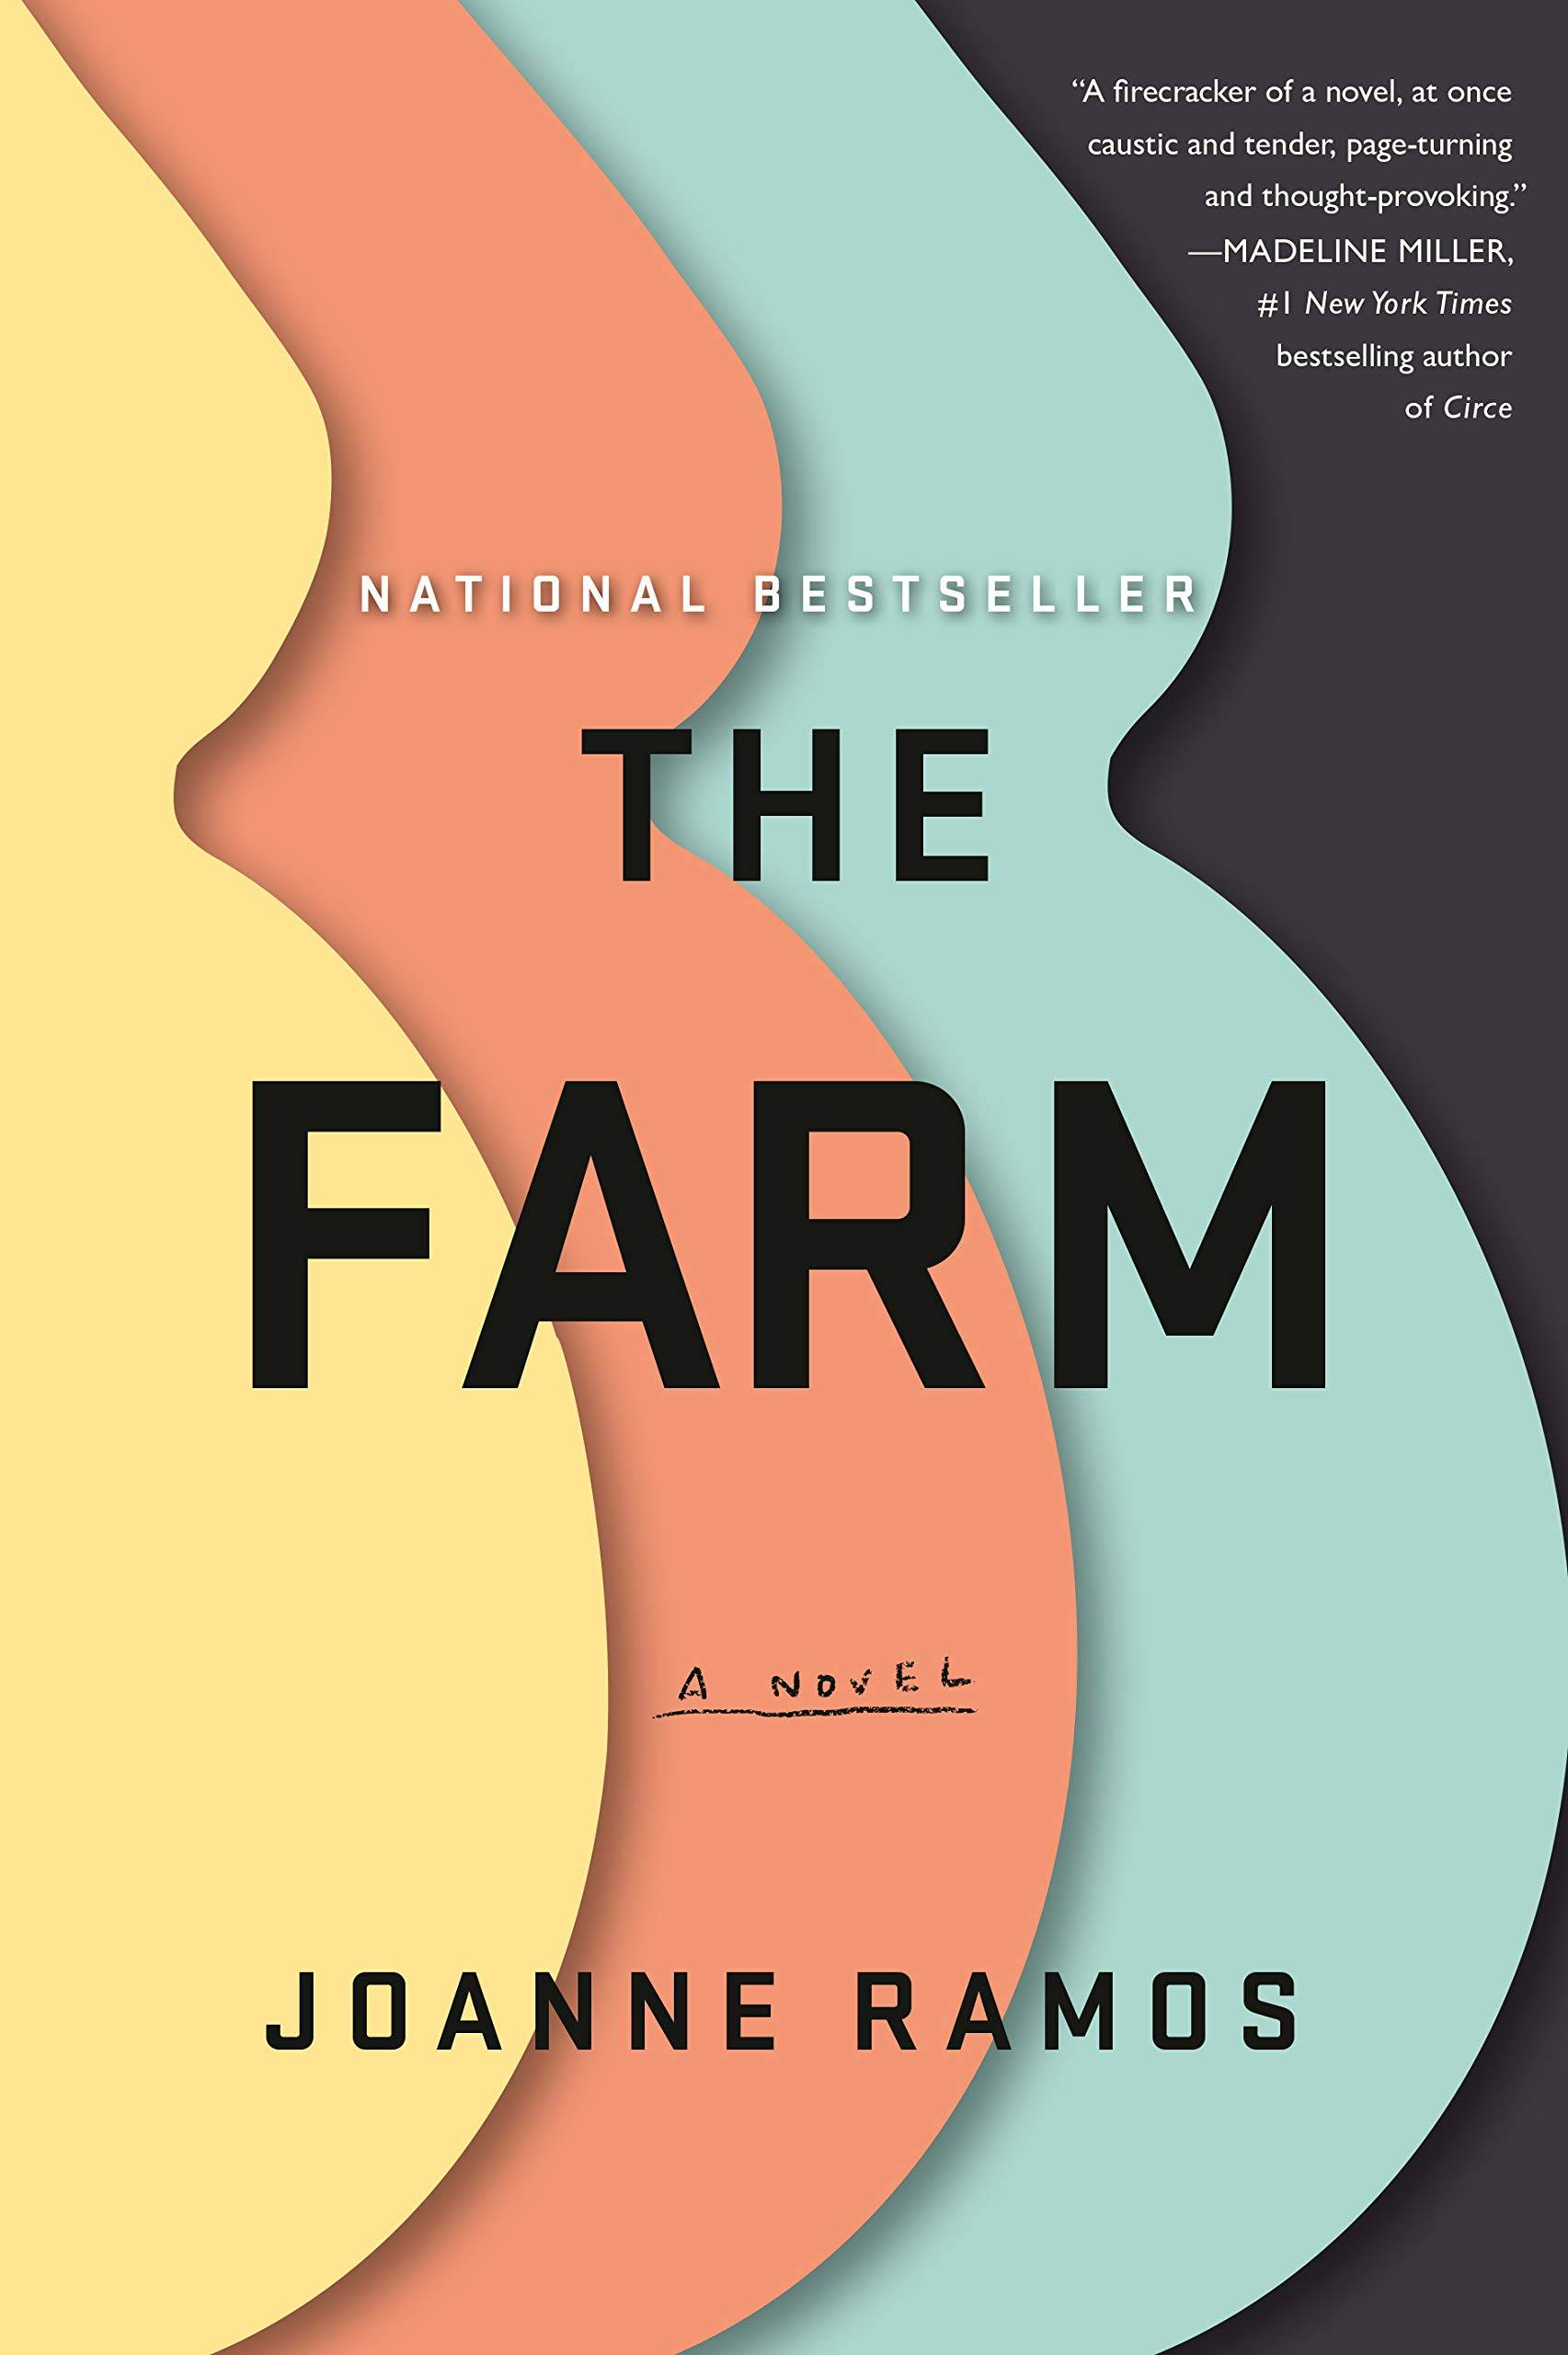 "The Farm" book cover featuring the overlapping abstracted shapes of three pregnant women.